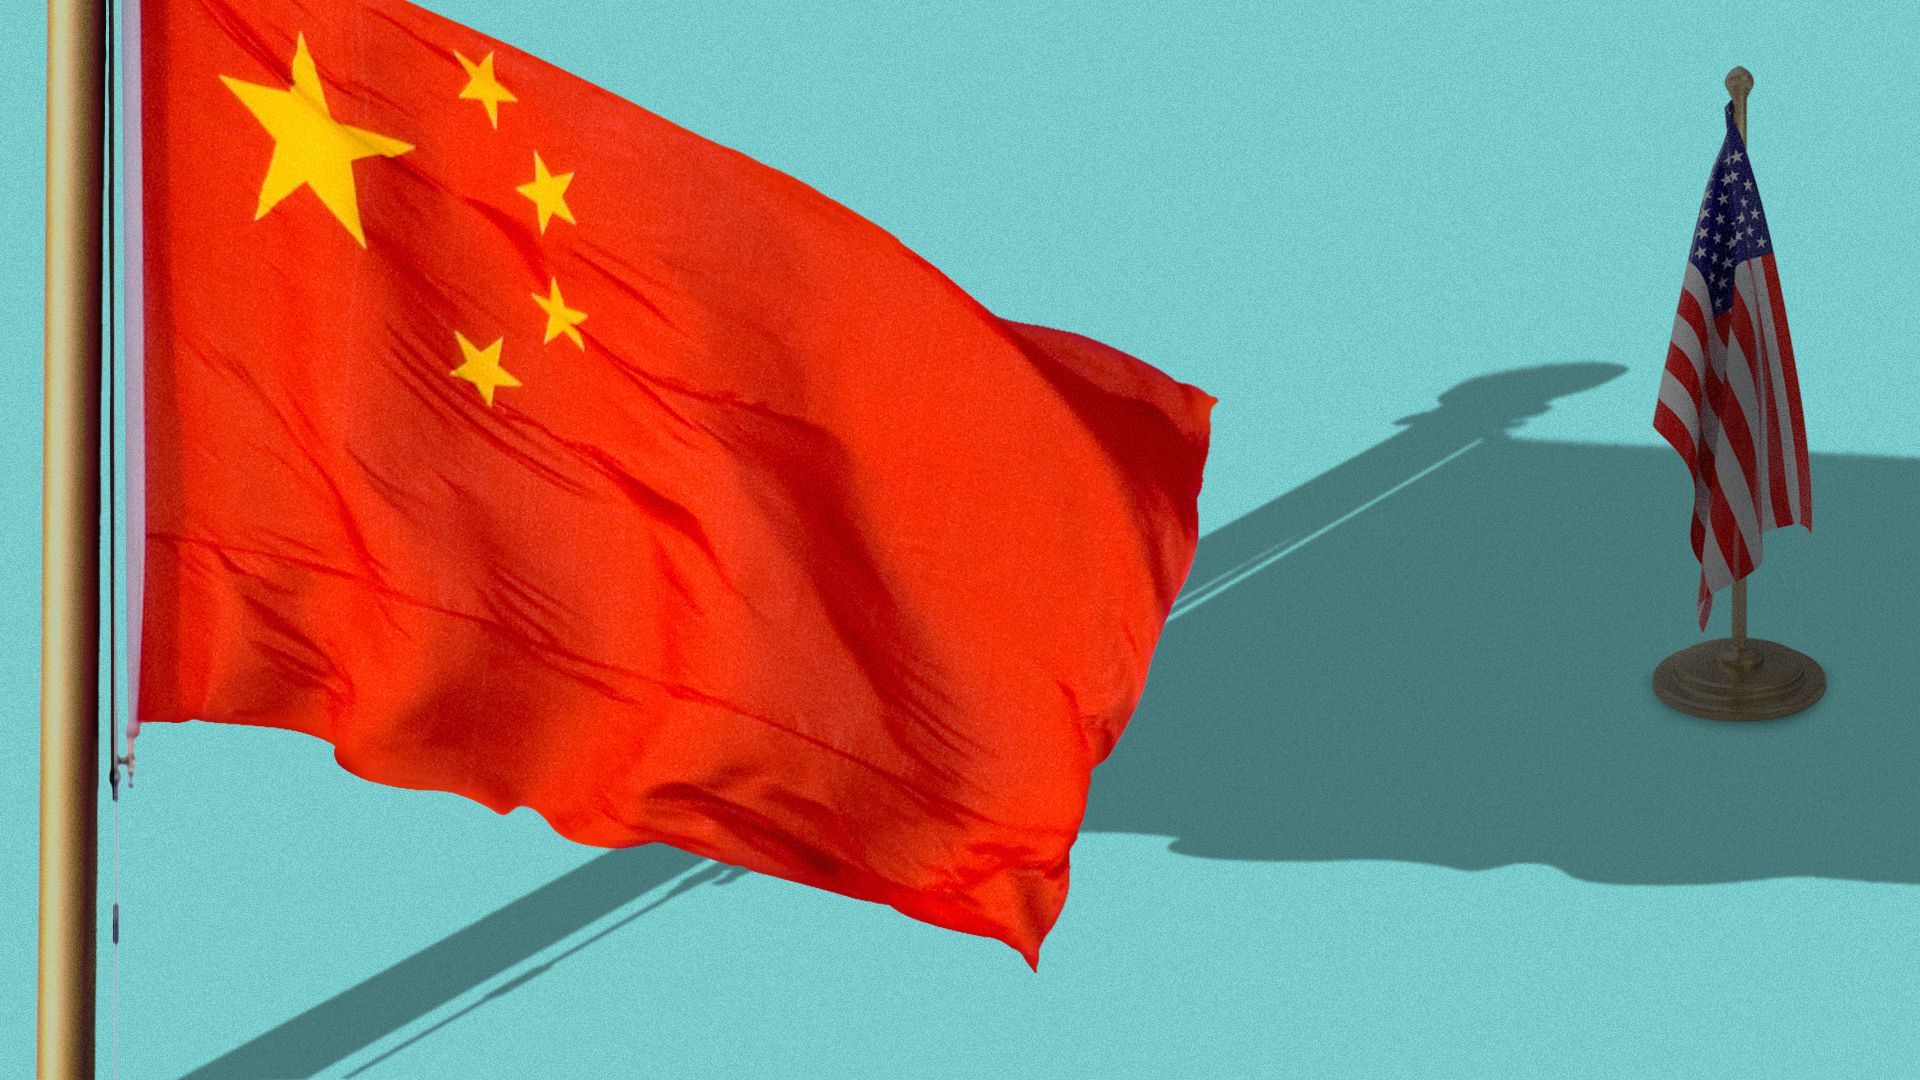  Illustration of China’s flag casting a shadow over a smaller US flag.